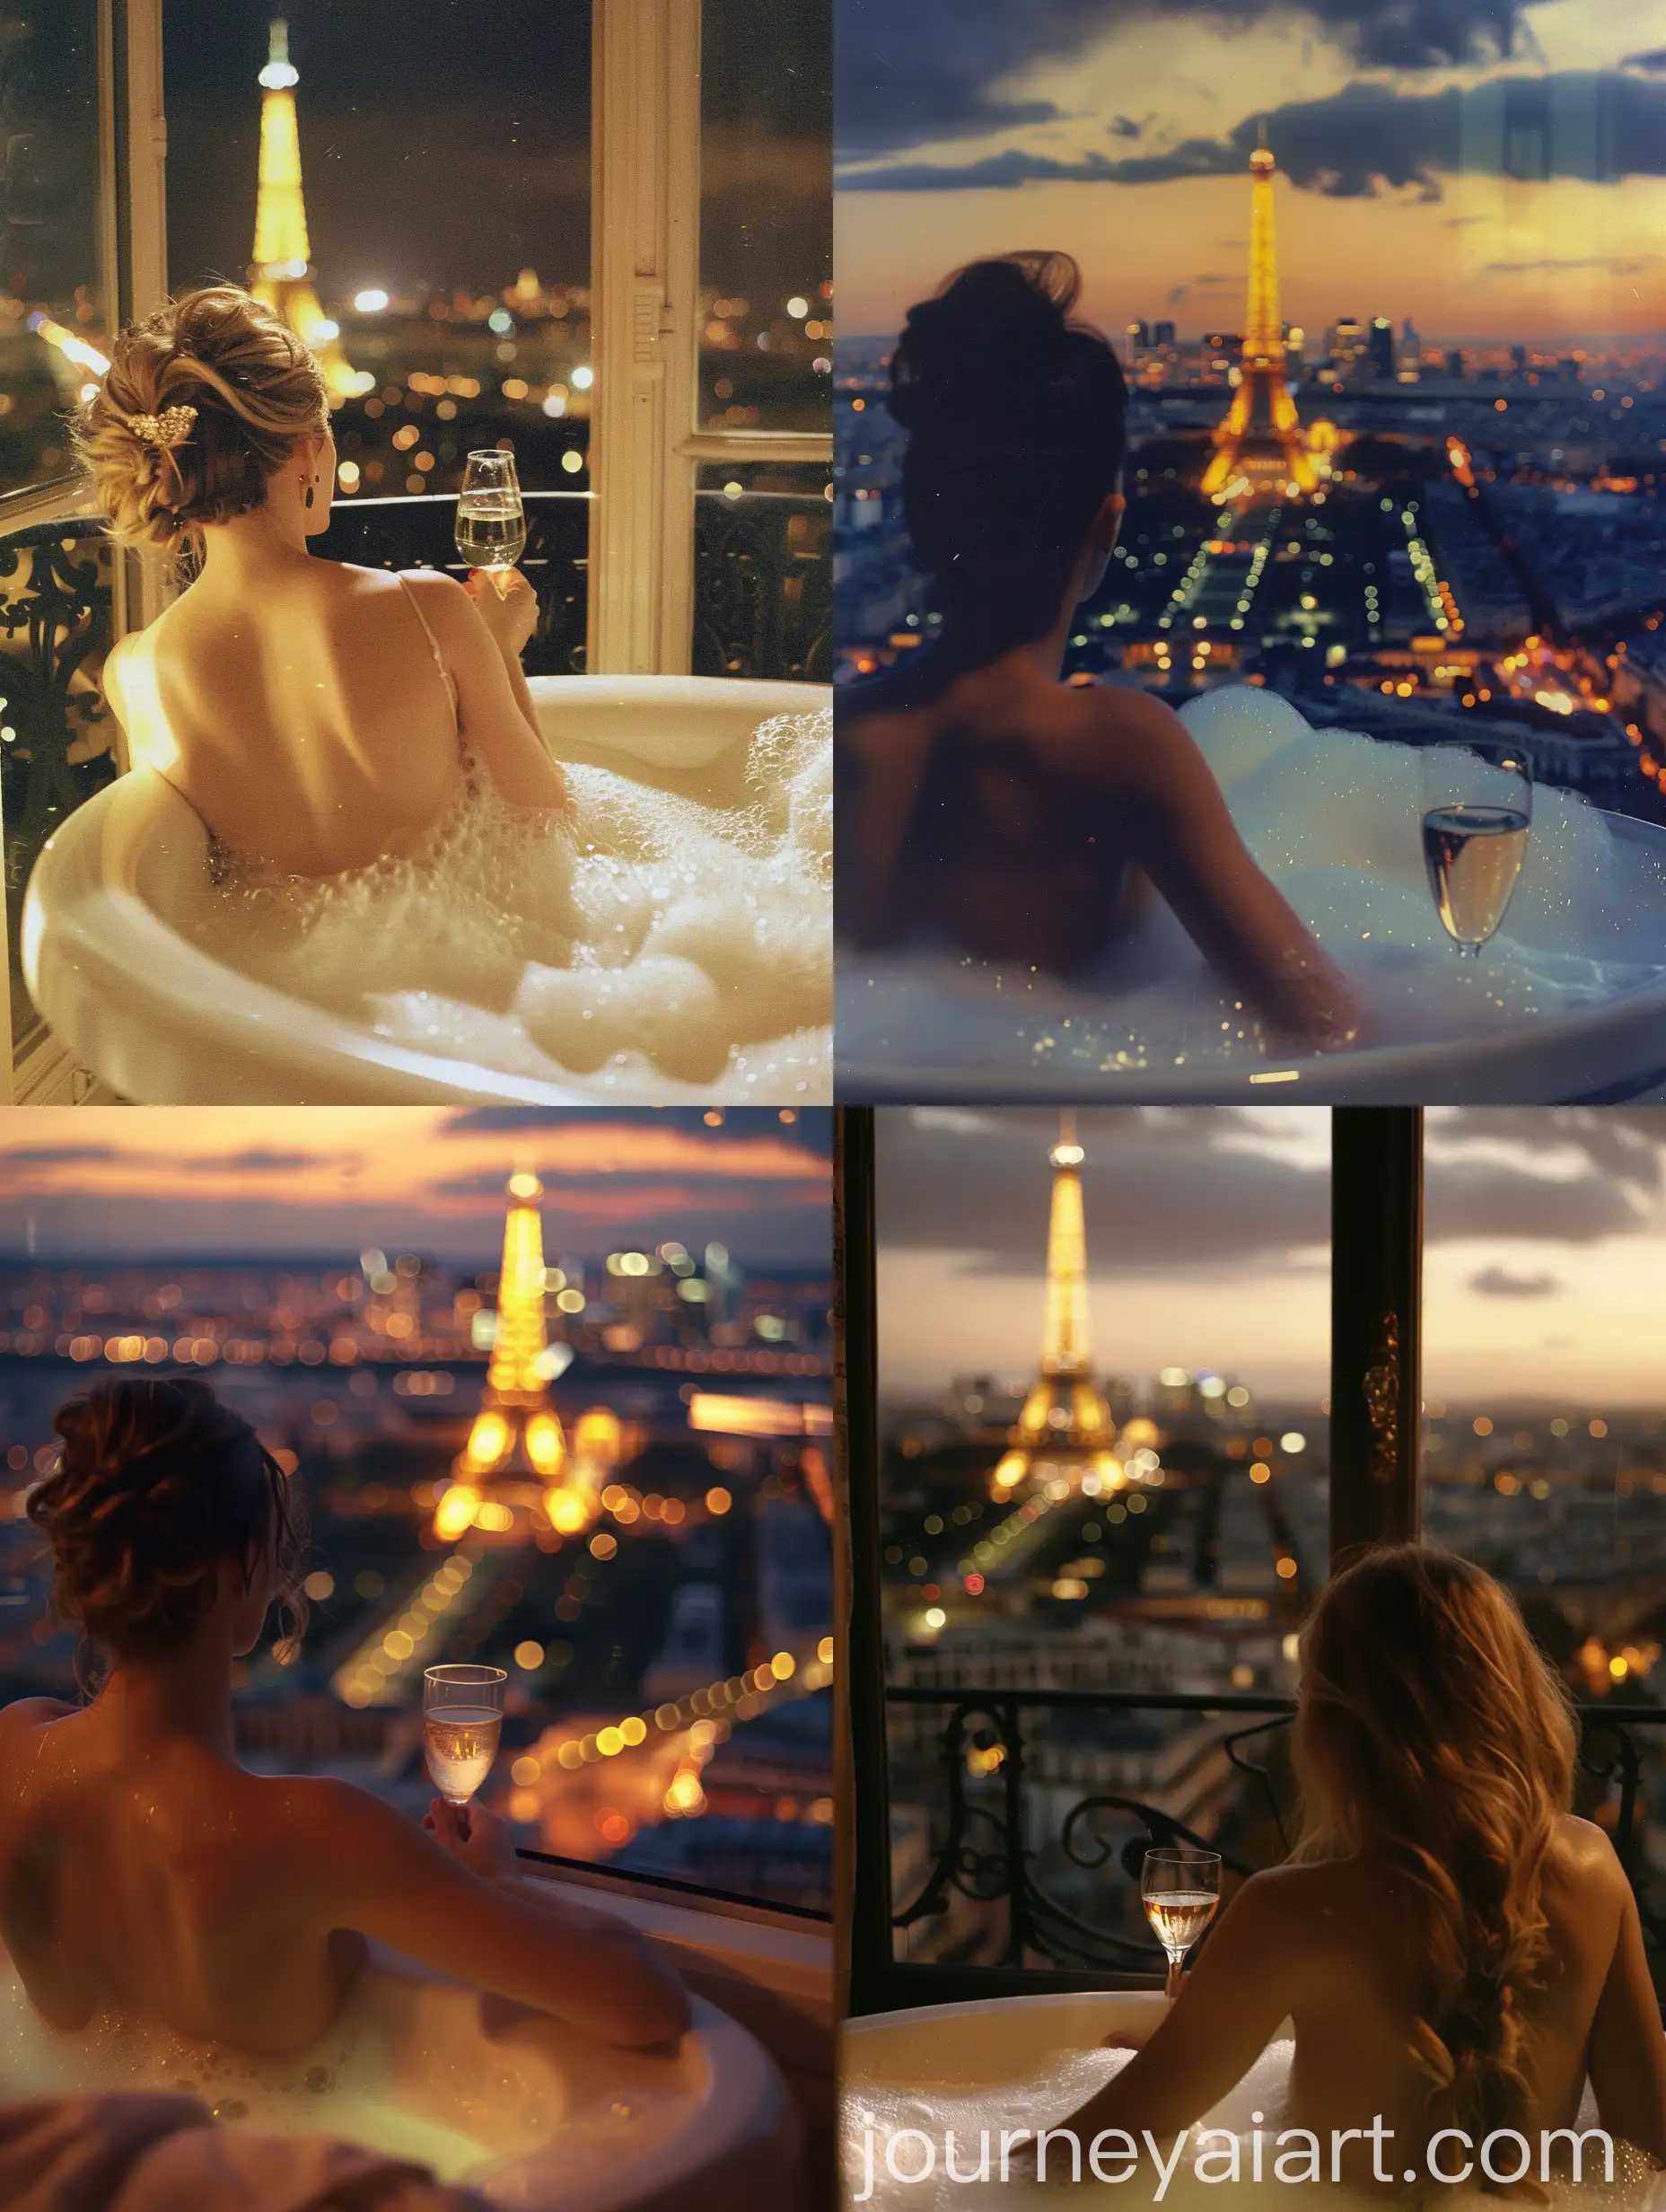 Nighttime-Eiffel-Tower-View-from-HighRise-Window-with-Victorias-Secret-Model